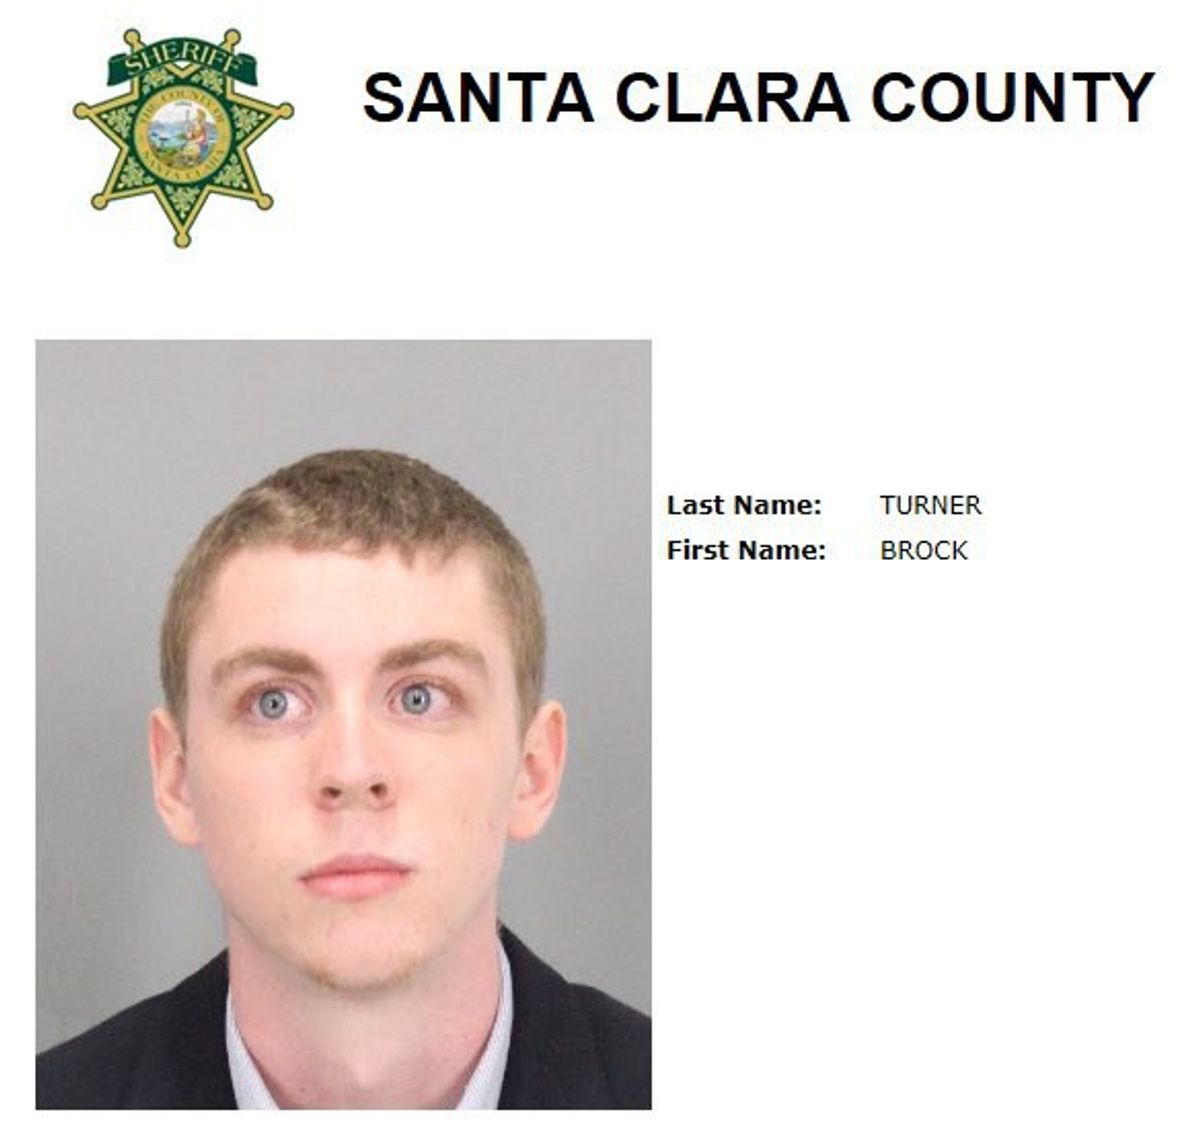 Yet Another Issue With The Stanford Rapist Situation